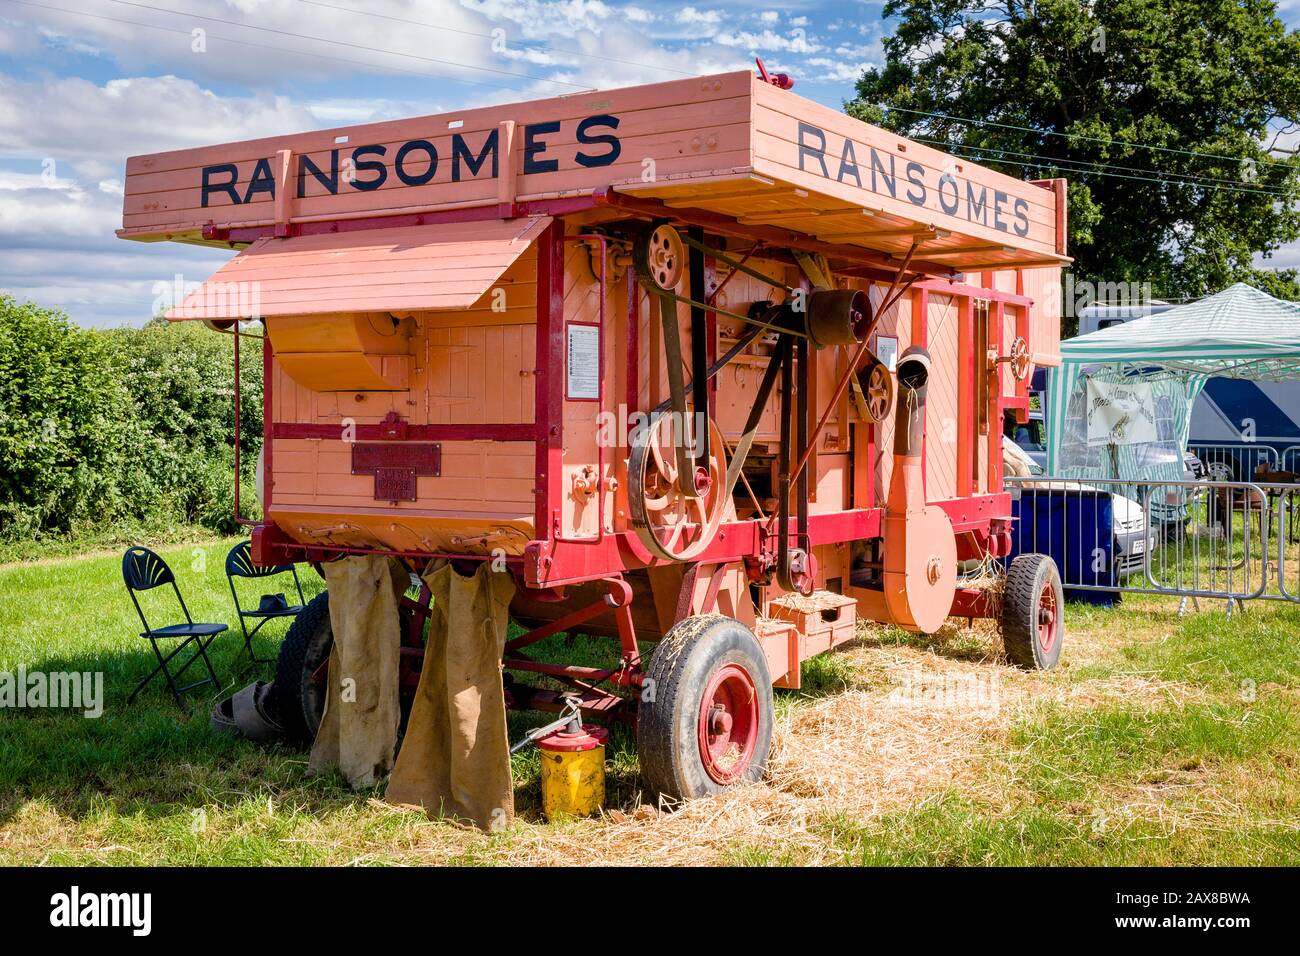 A 1950s Ransomes threshing machine restored and on display at Heddington Steam Fair and Courntry Show UK Stock Photo